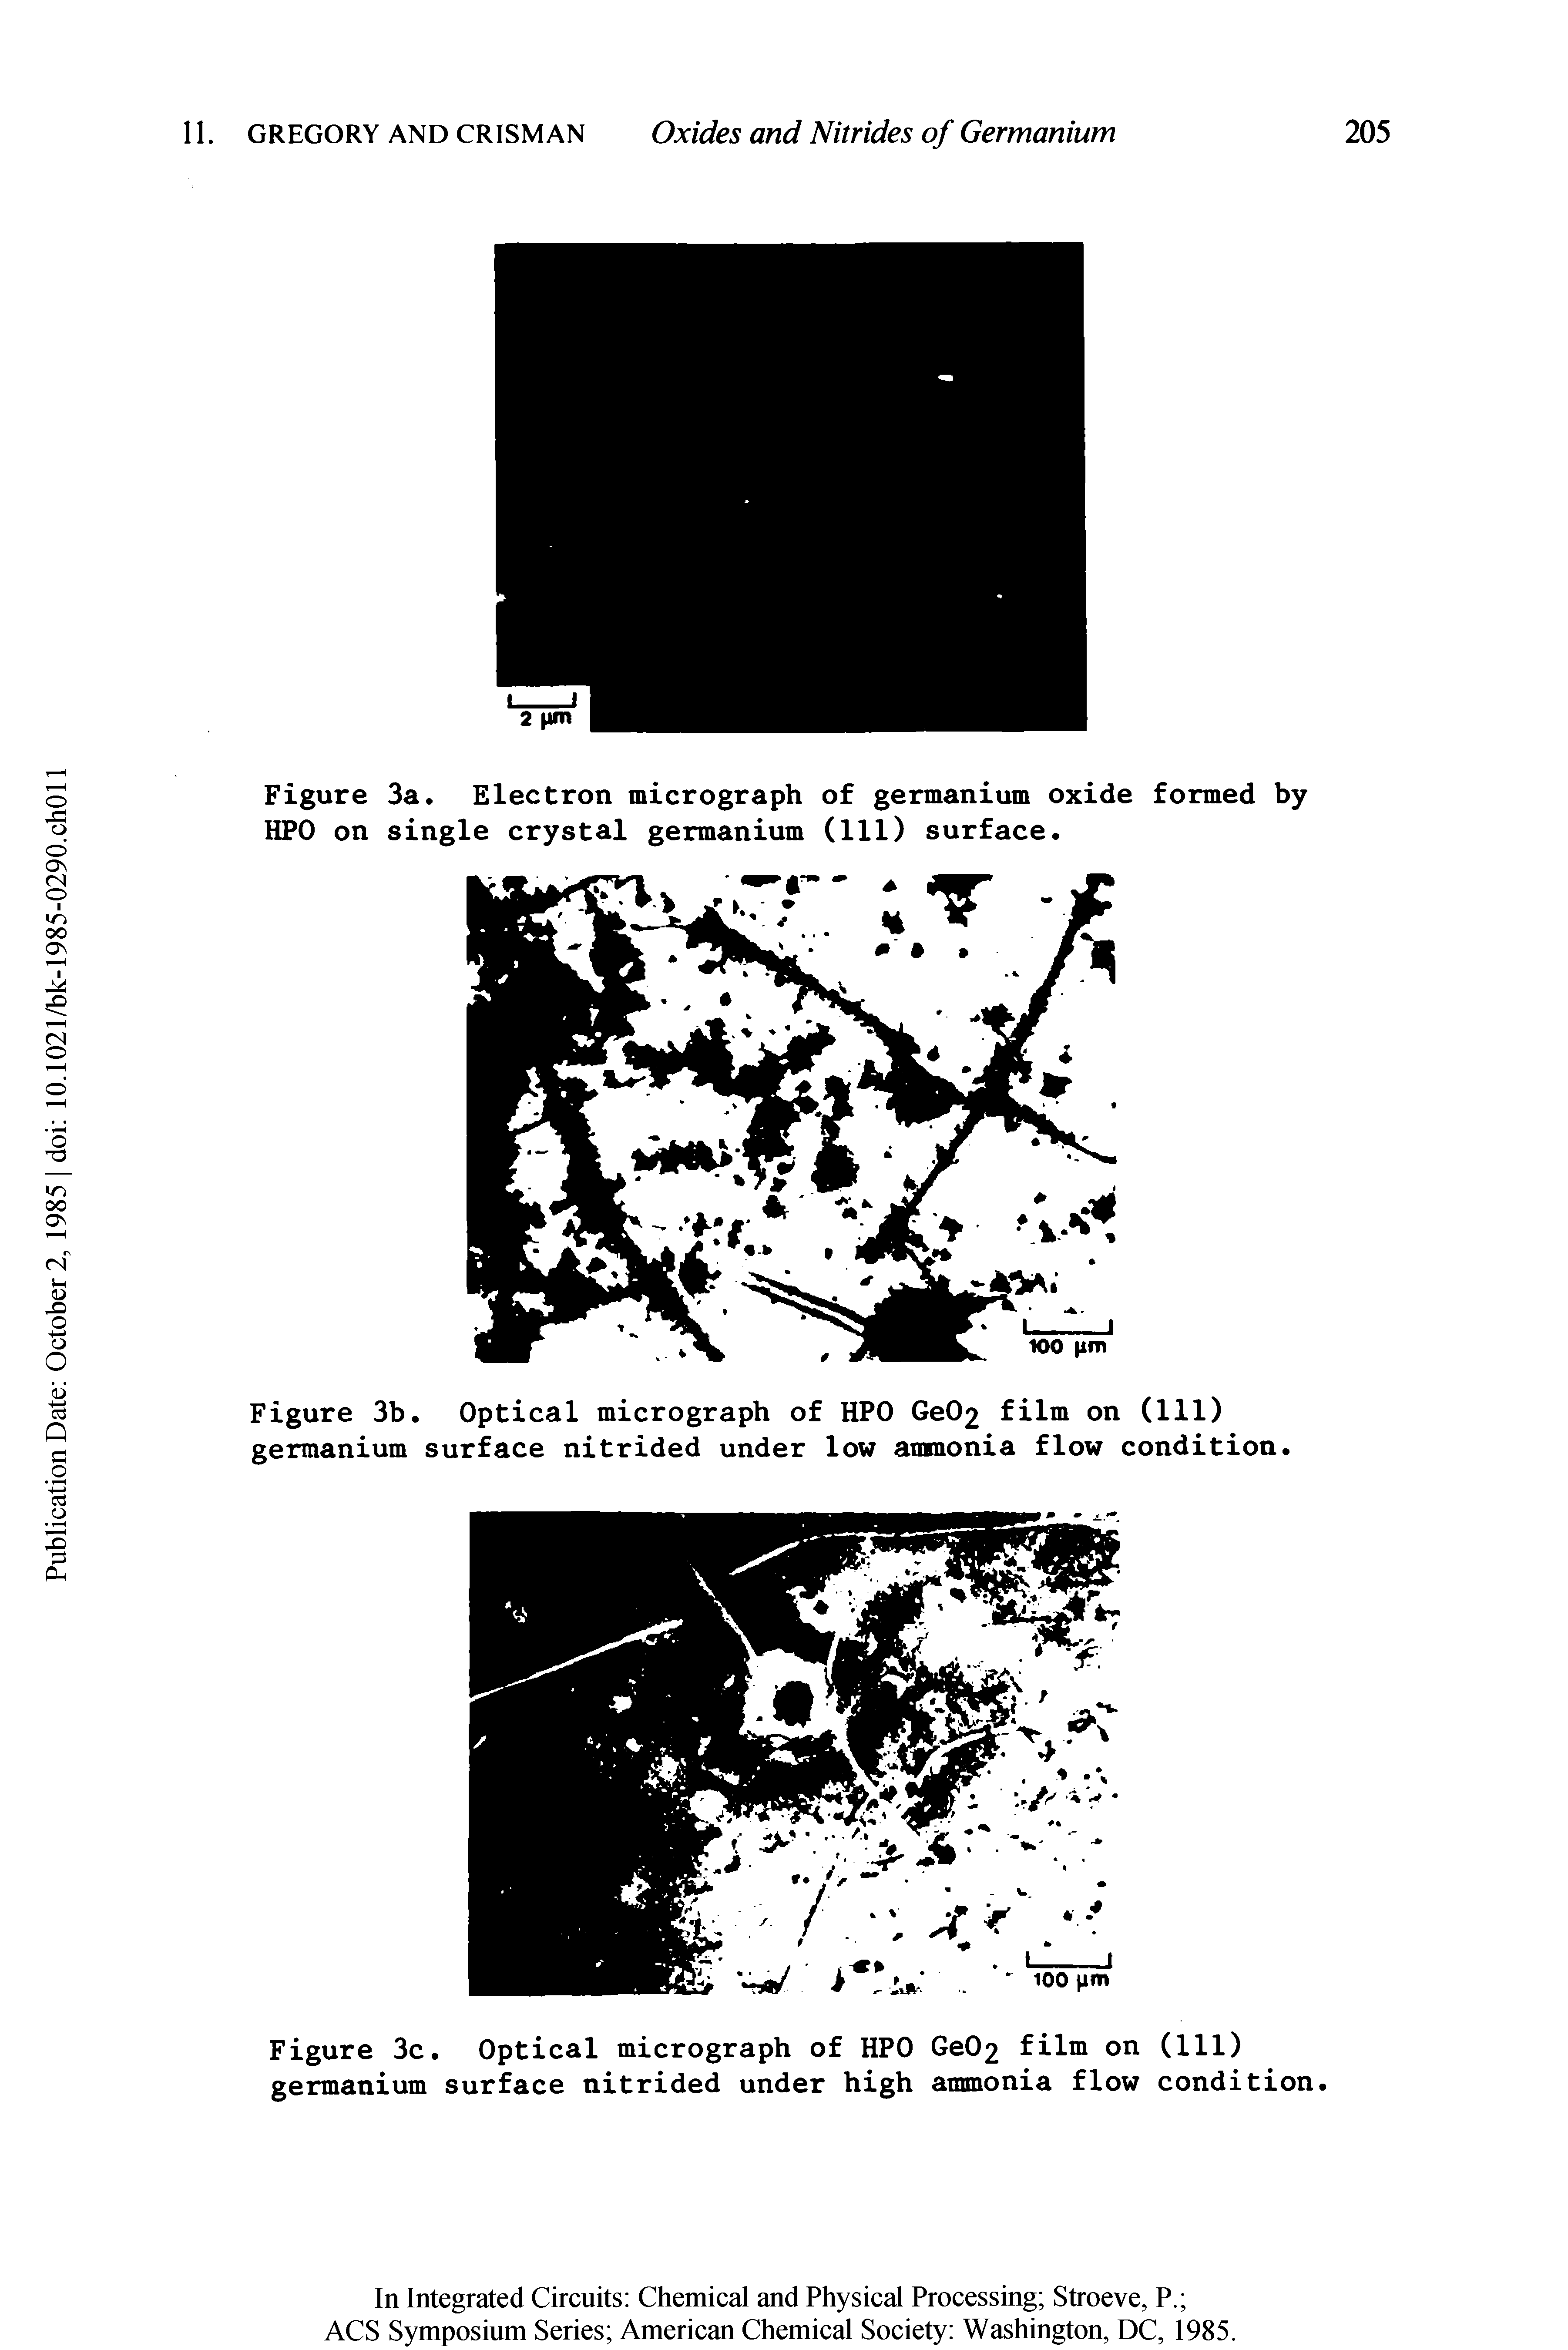 Figure 3b. Optical micrograph of HPO Ge02 film on (111) germanium surface nitrided under low ammonia flow condition.